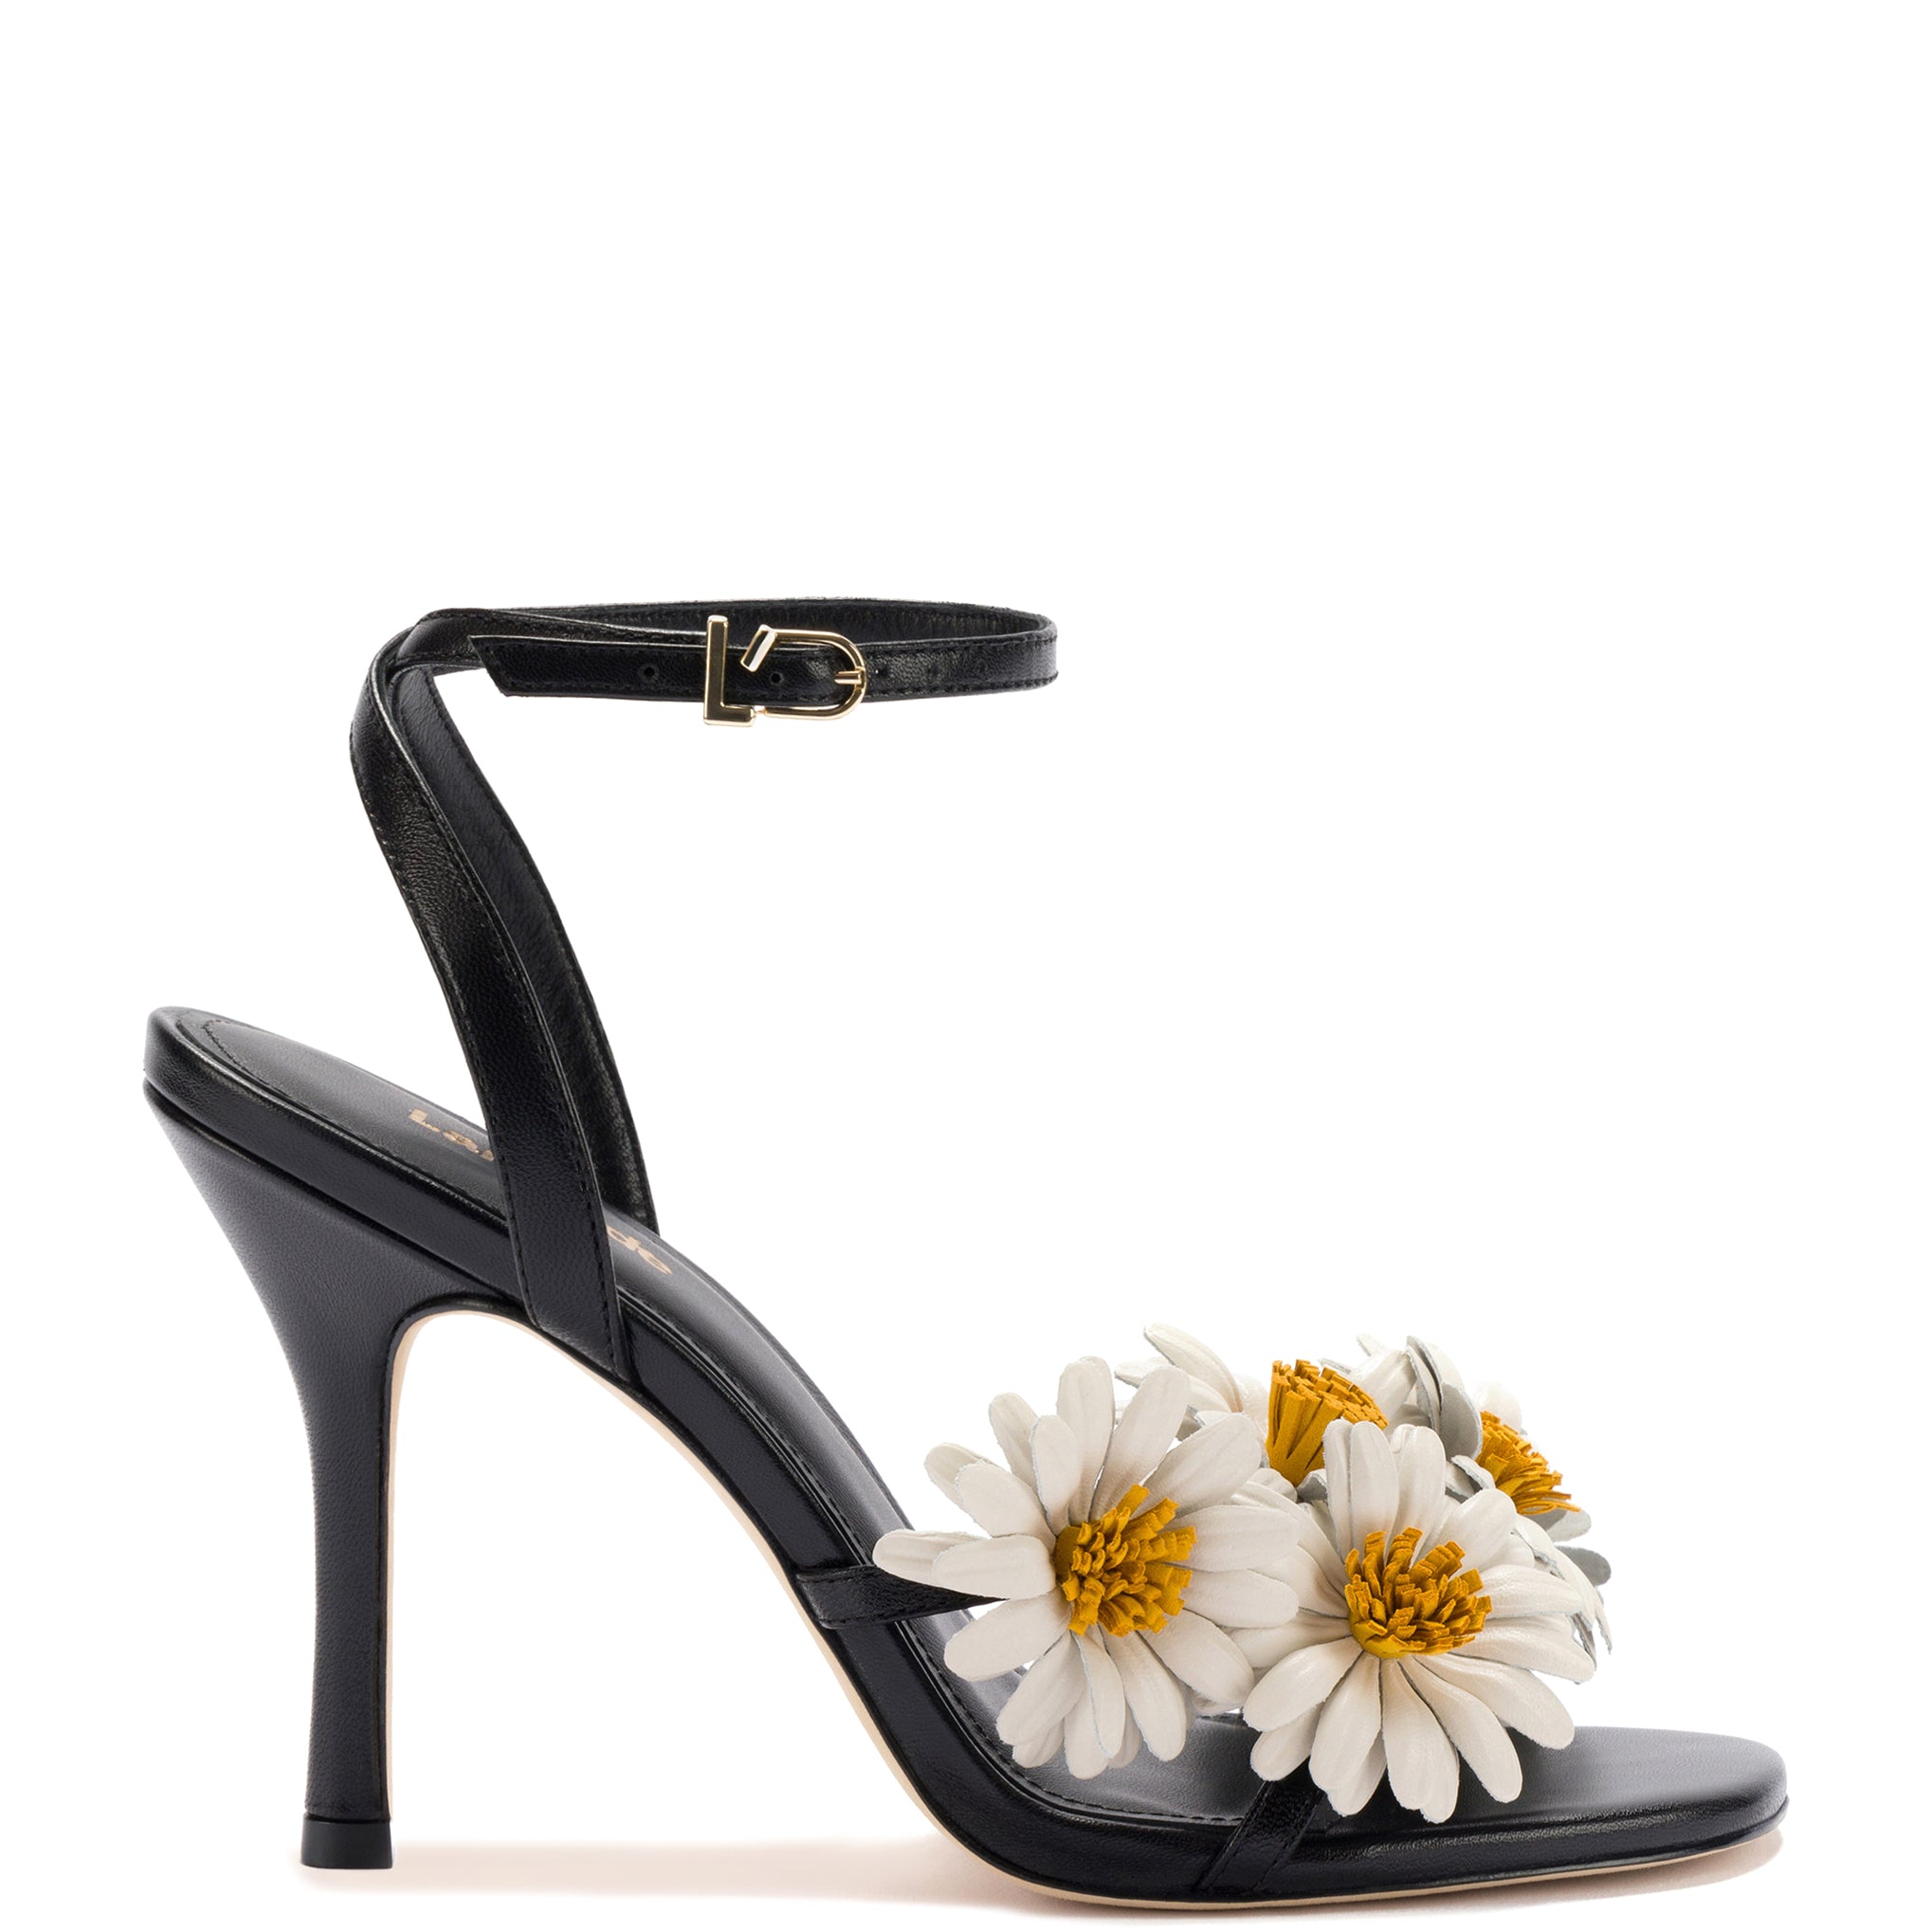 Fiore Sandal In Black Leather